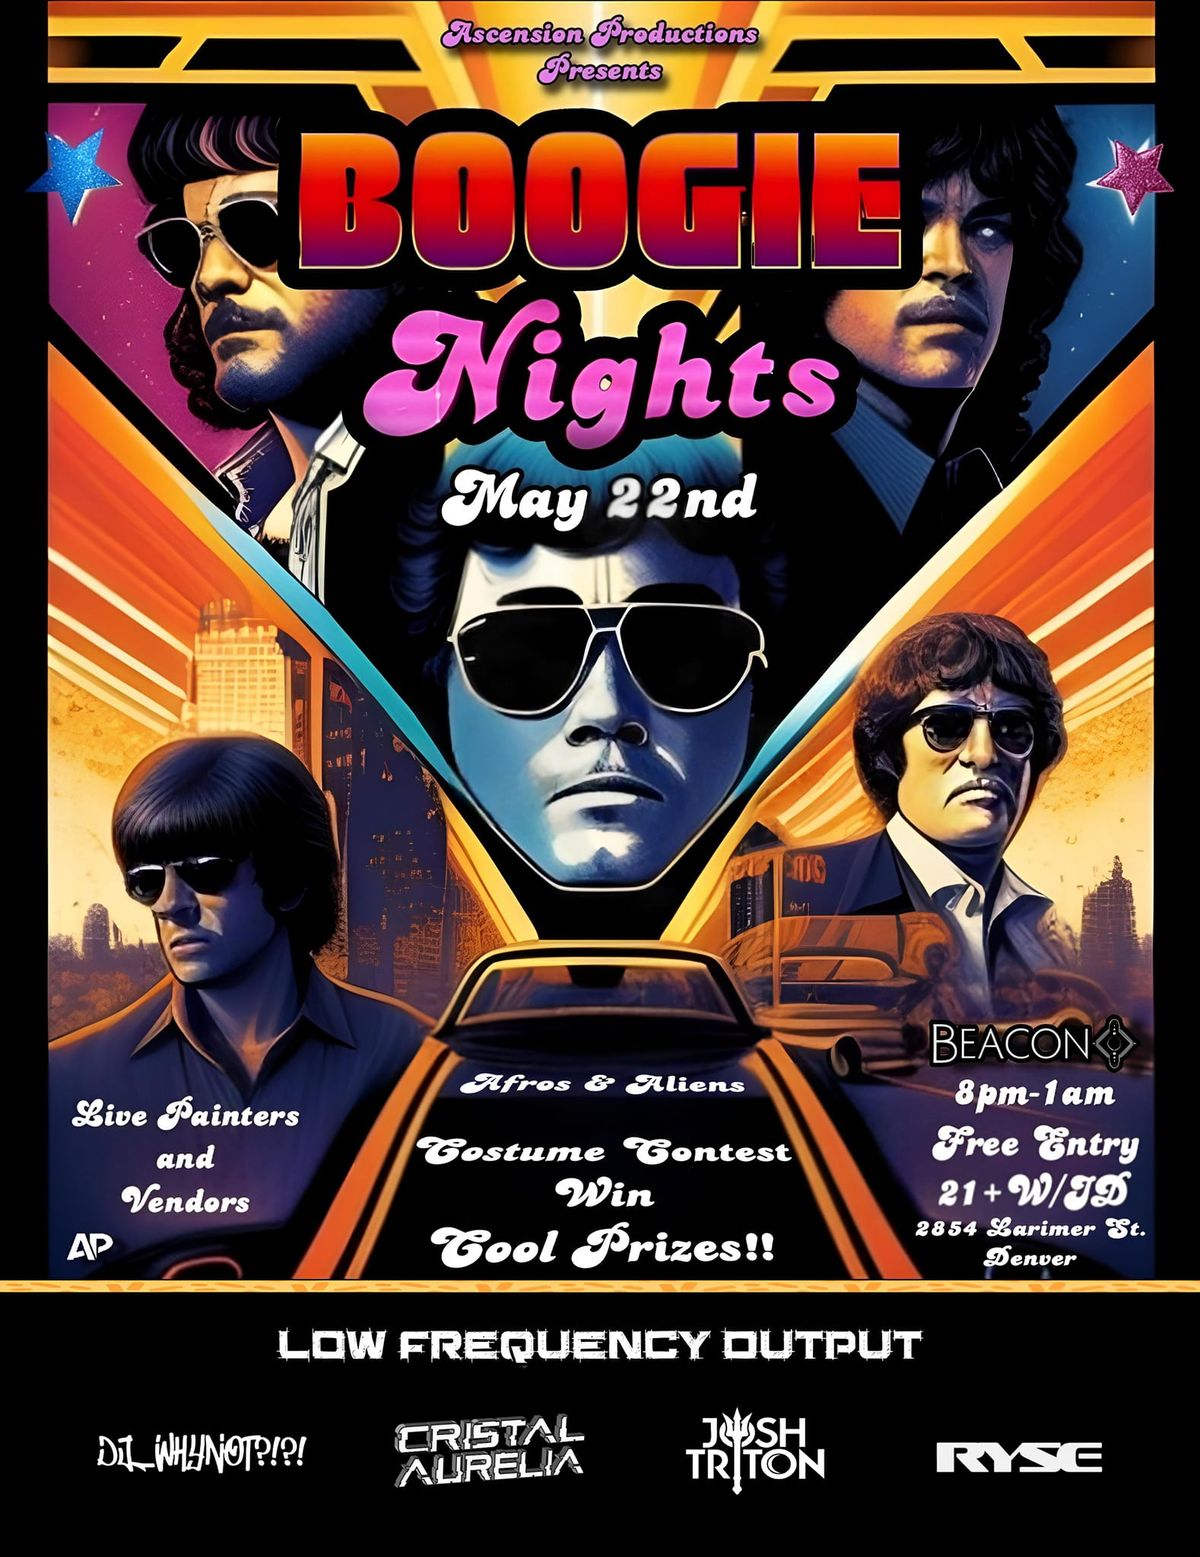 Boogie Nights @ Beacon RiNo May 22nd NO COVER!! Ascension Productions 1 year anniversary!